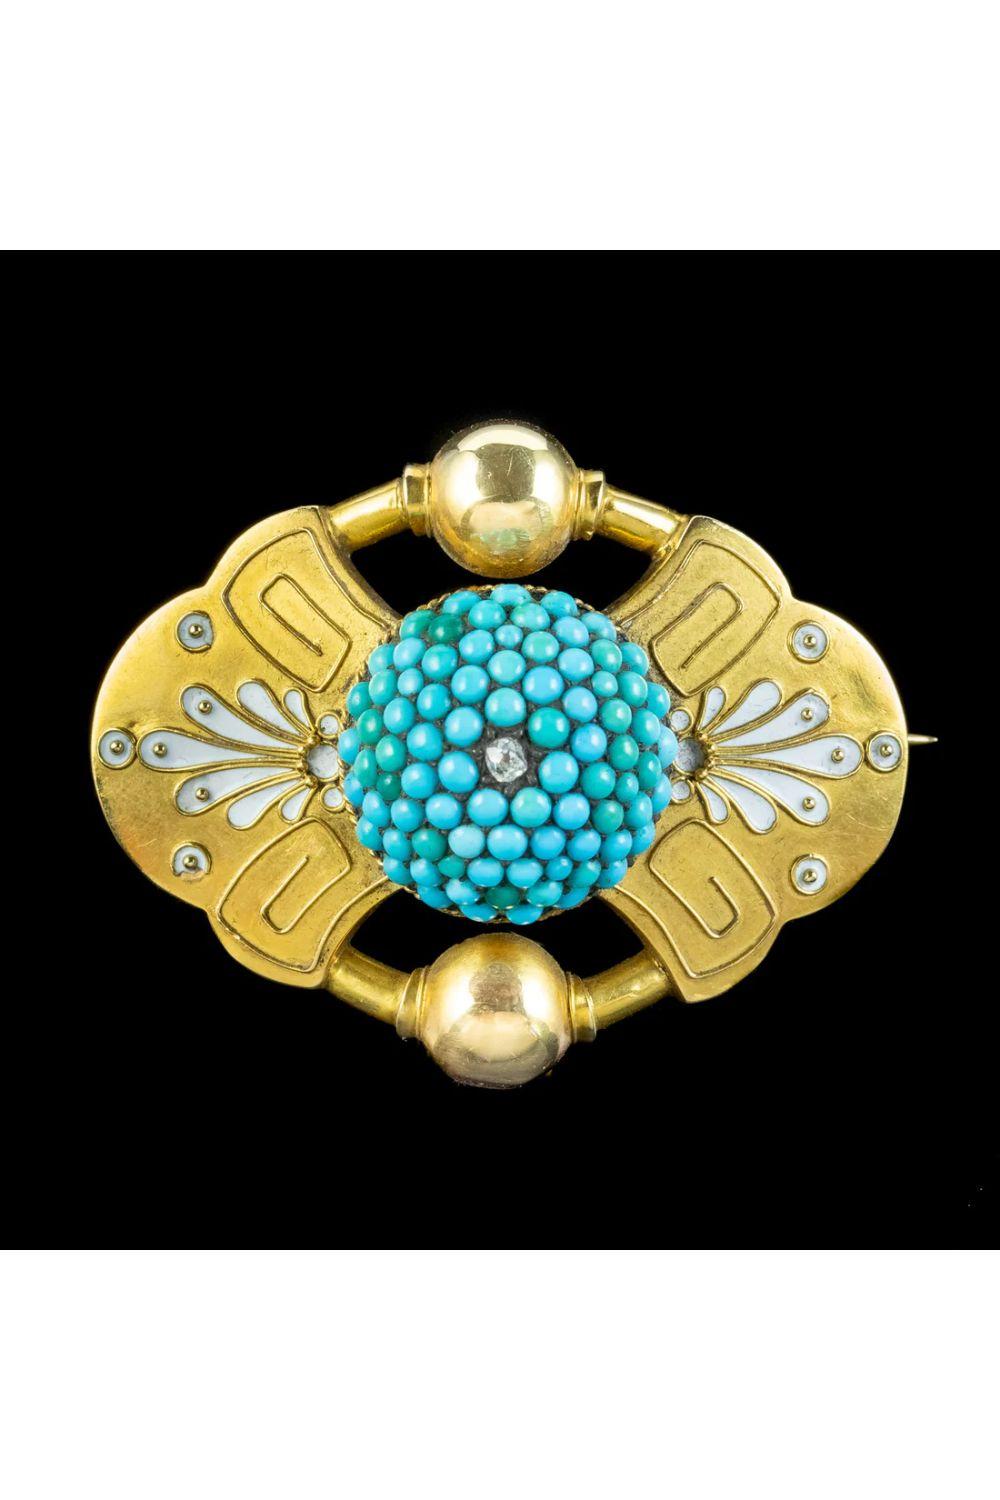 A remarkable antique Victorian Etruscan revival brooch fashioned in 18ct gold with a large turquoise encrusted dome in the centre, topped with a twinkling old mine cut diamond. 

Etruscan revival pieces were crafted in the late 1800s after ancient